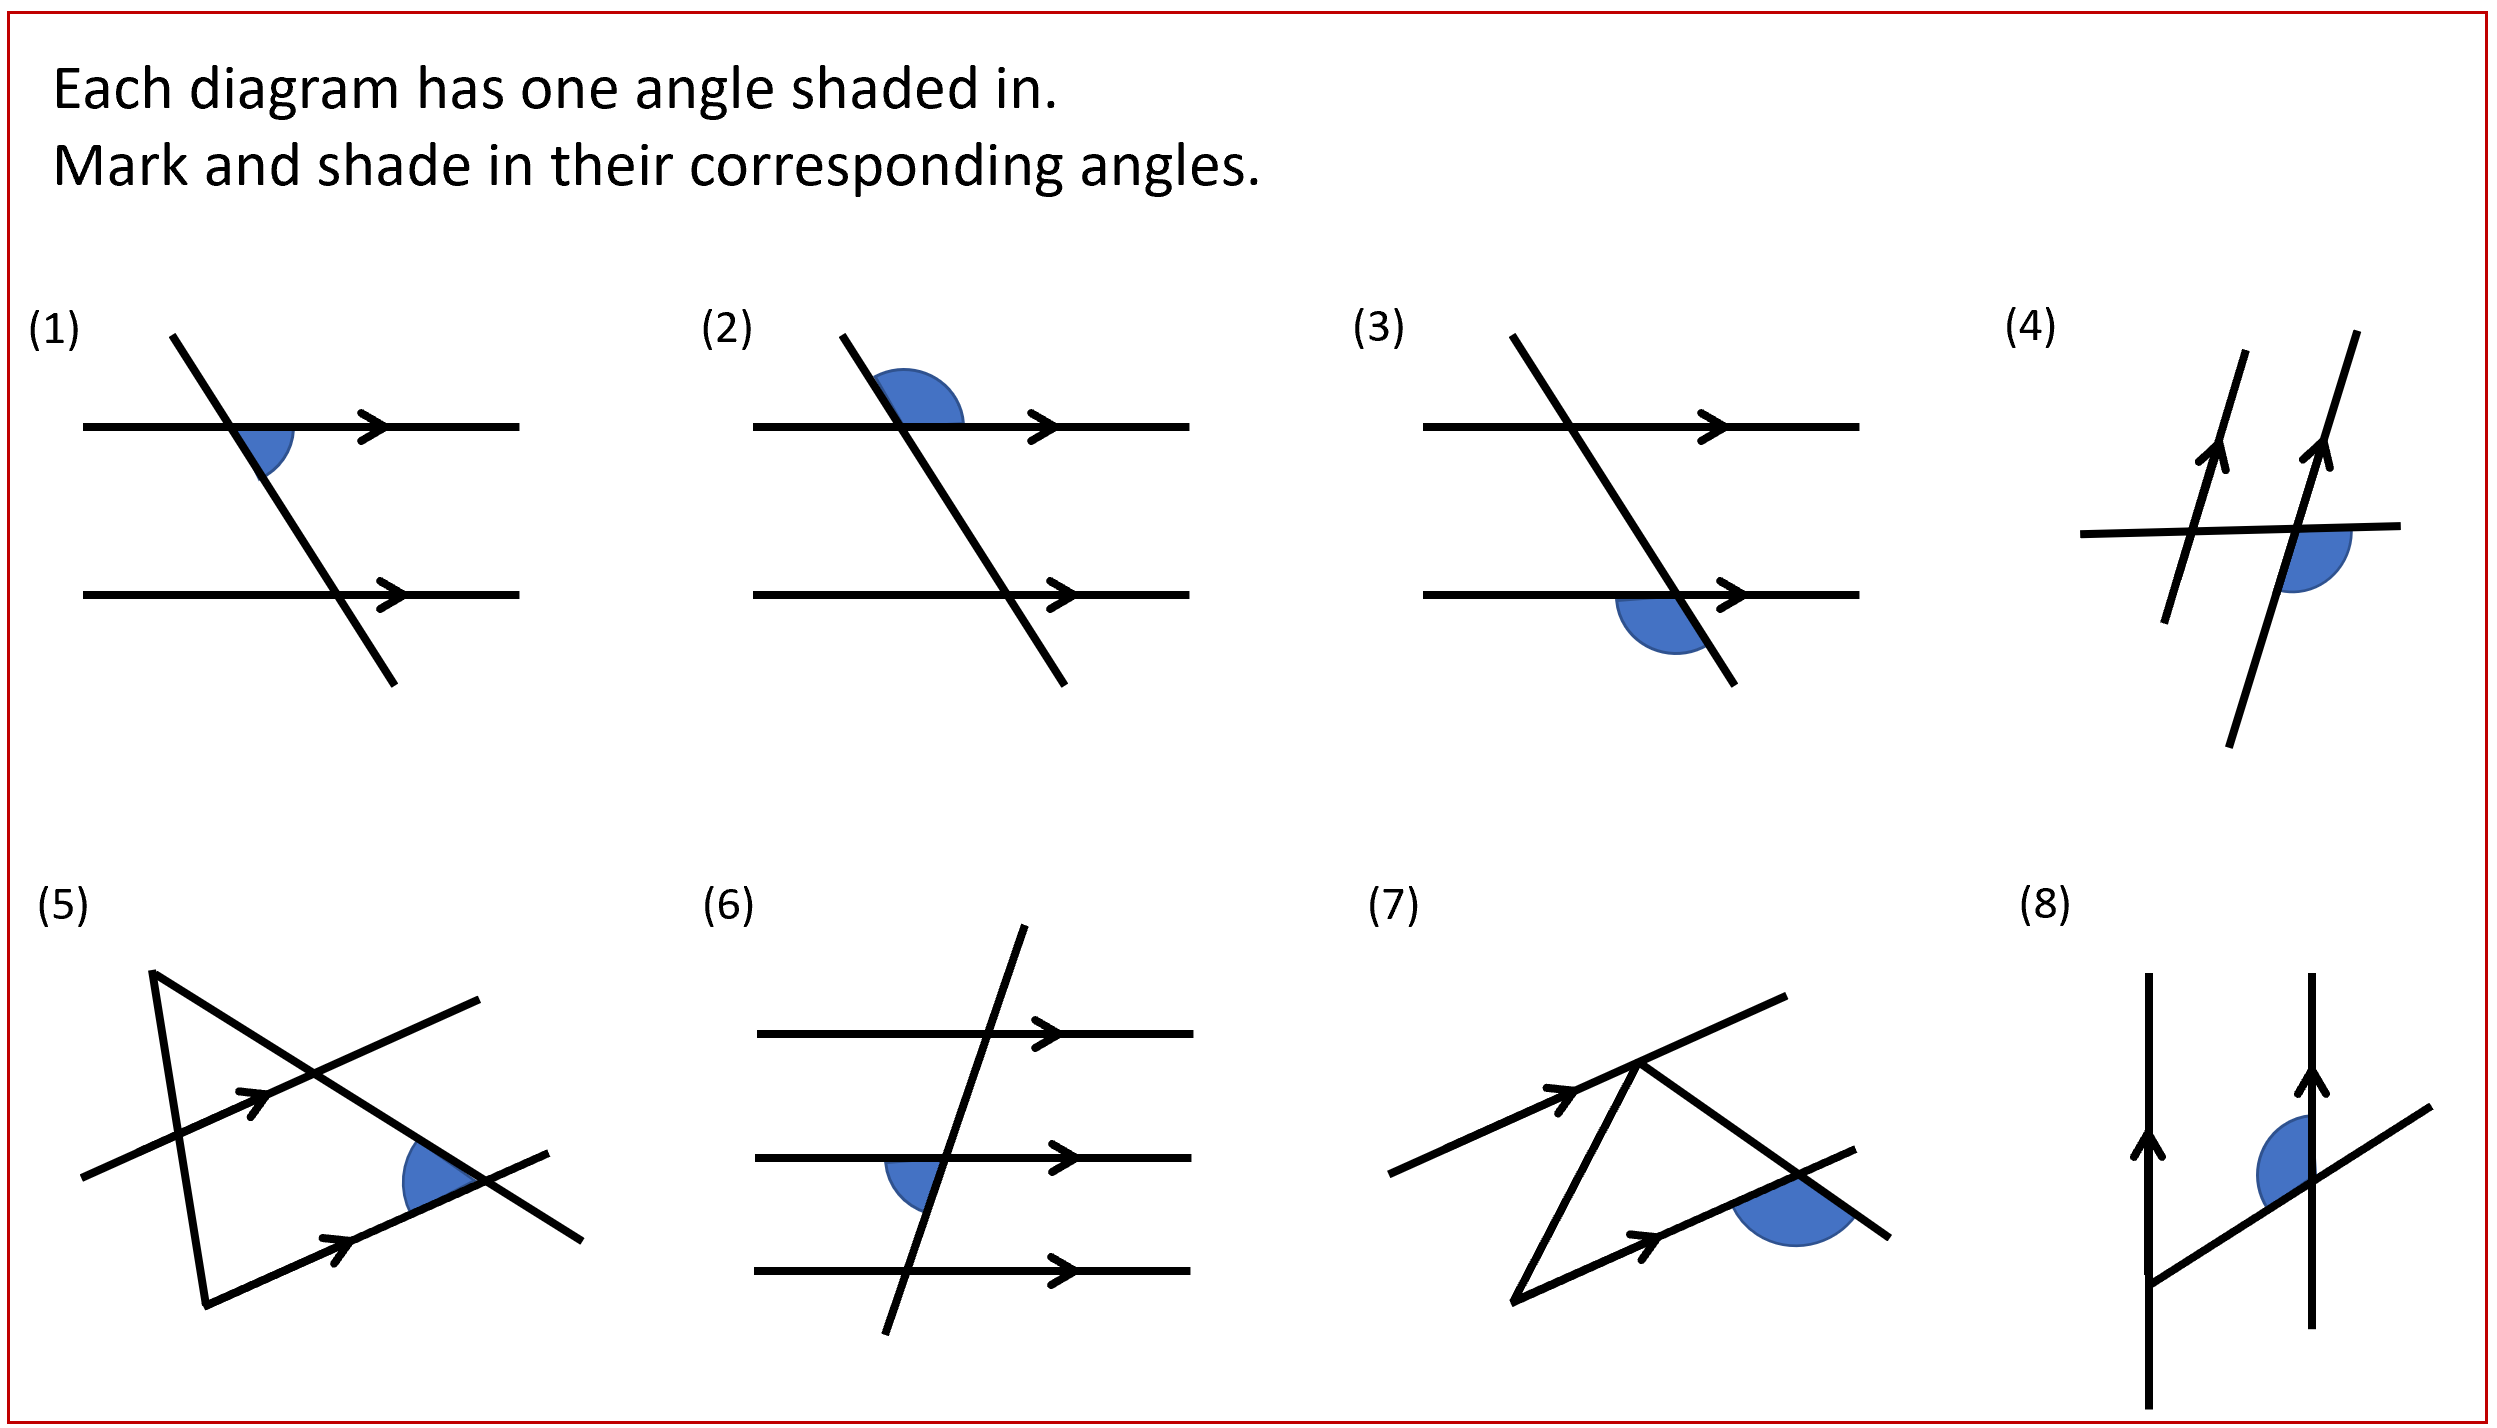 4 Where is its corresponding angle